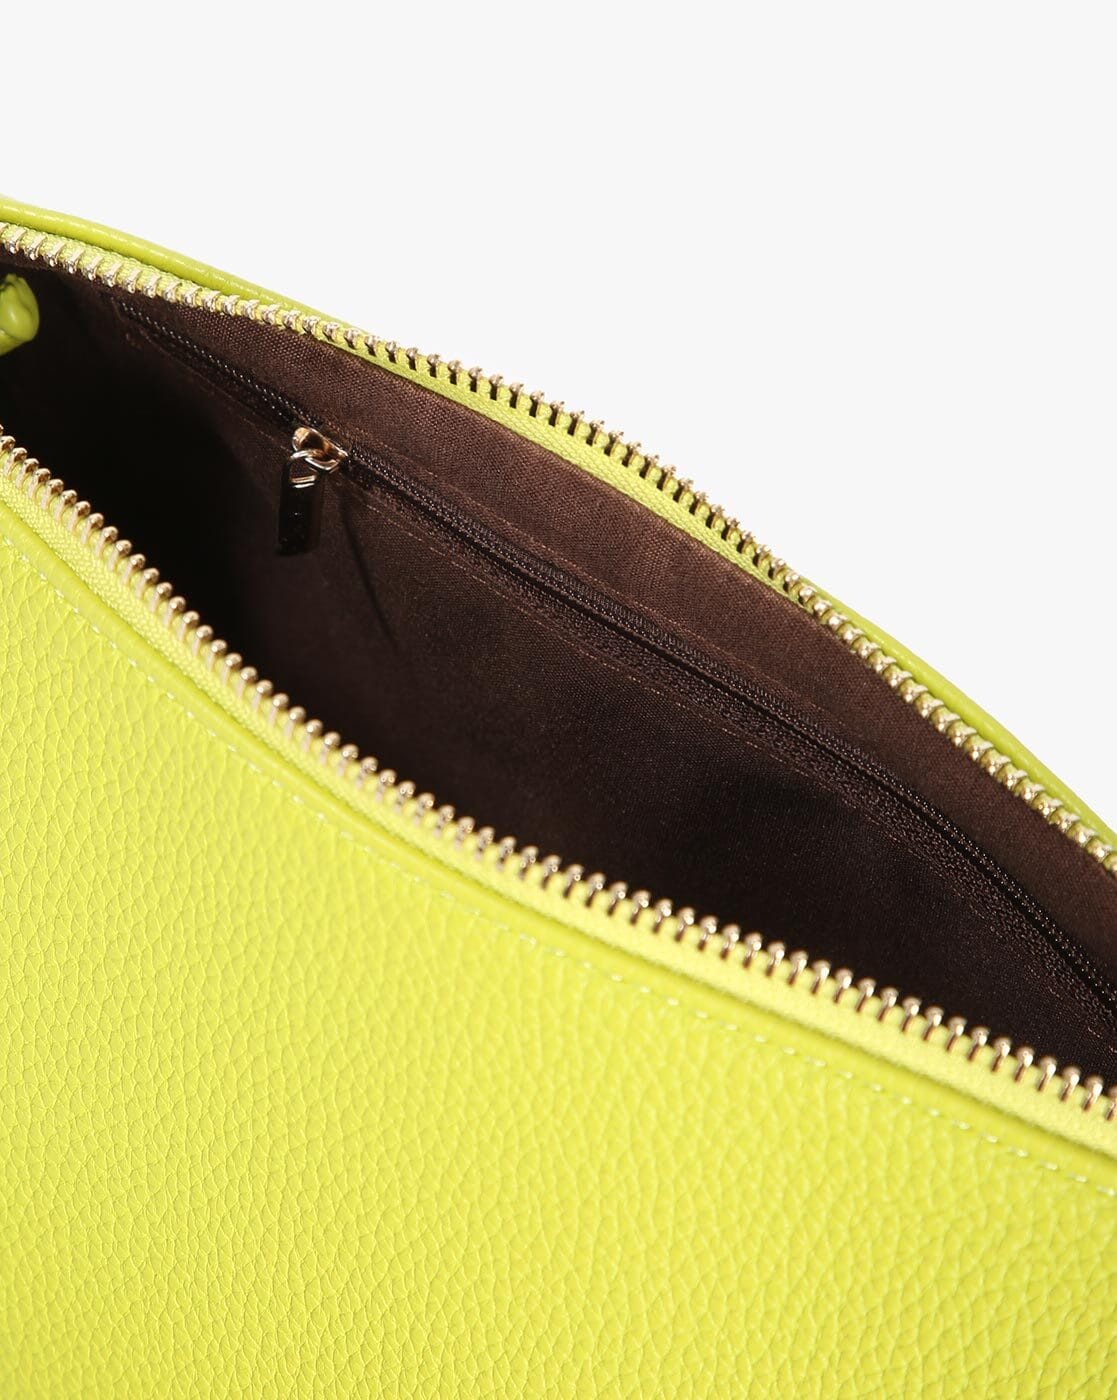 Dr Martens neon yellow leather tassel convertible bagbackpack  wwwcourtmarriageagracom